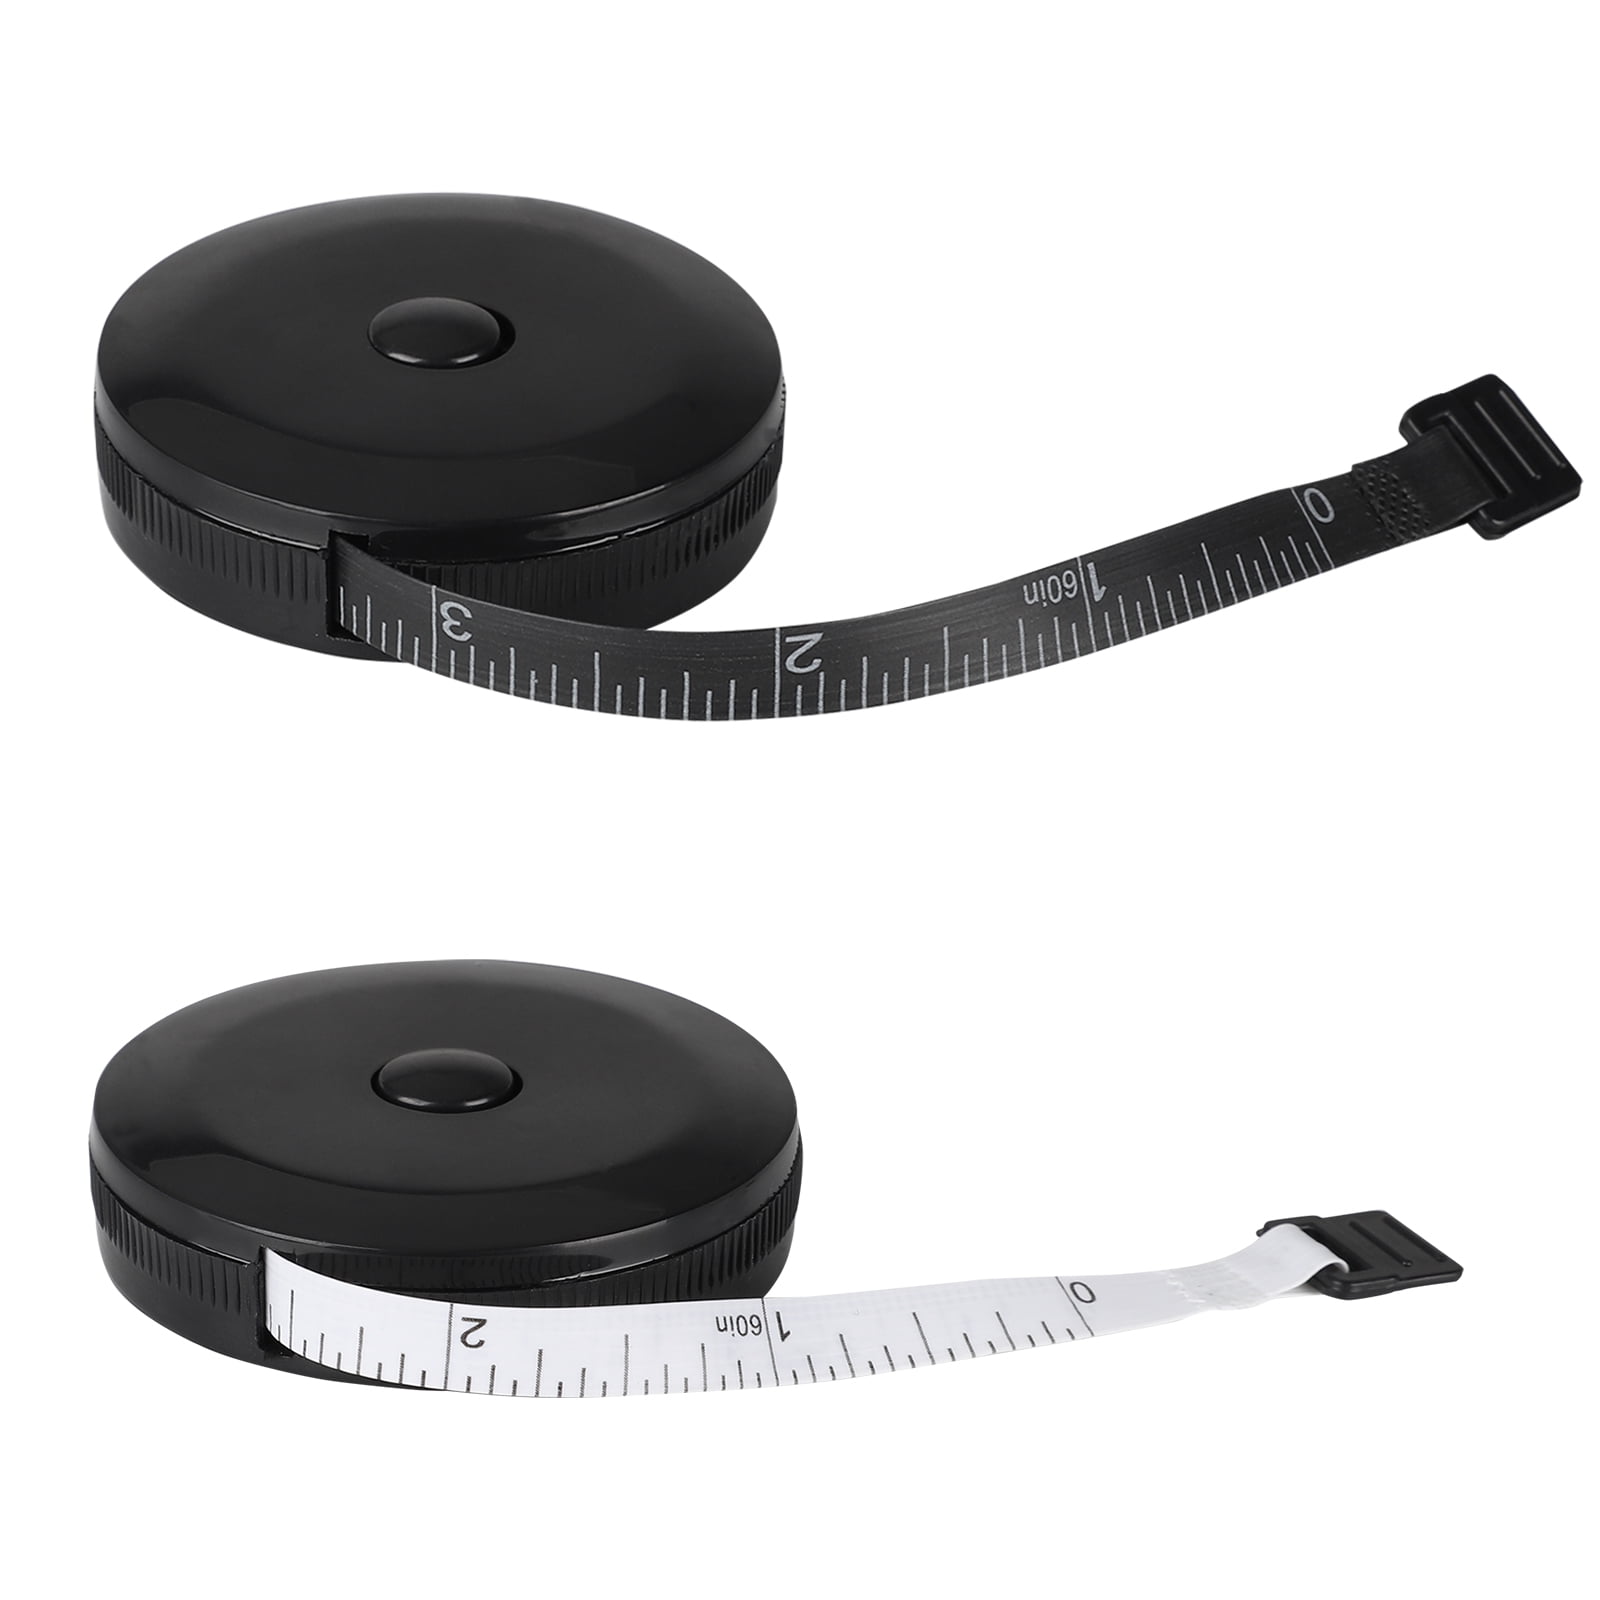 S B Body Measuring Tape Retractable inch tape for measurement for